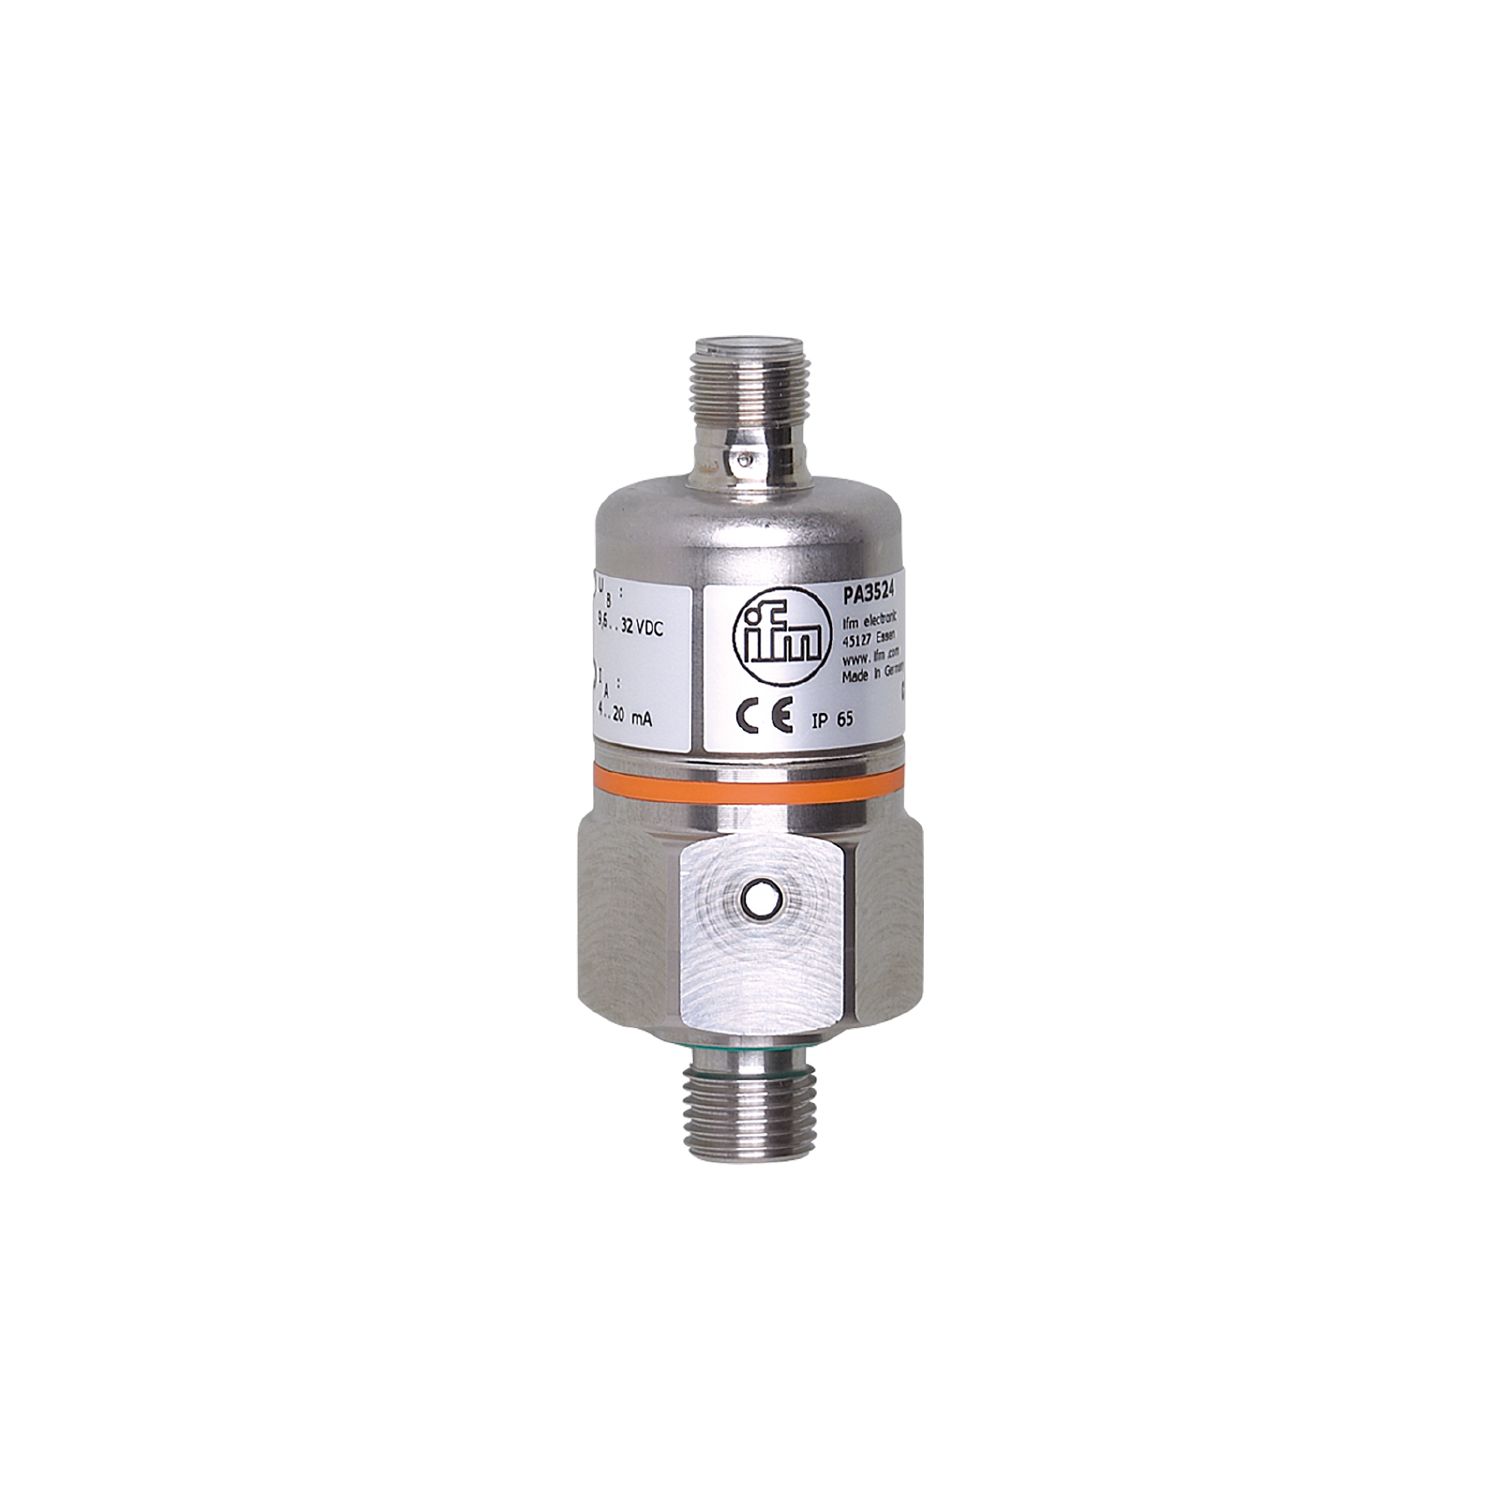 PA3509 - Pressure transmitter with ceramic measuring cell - ifm